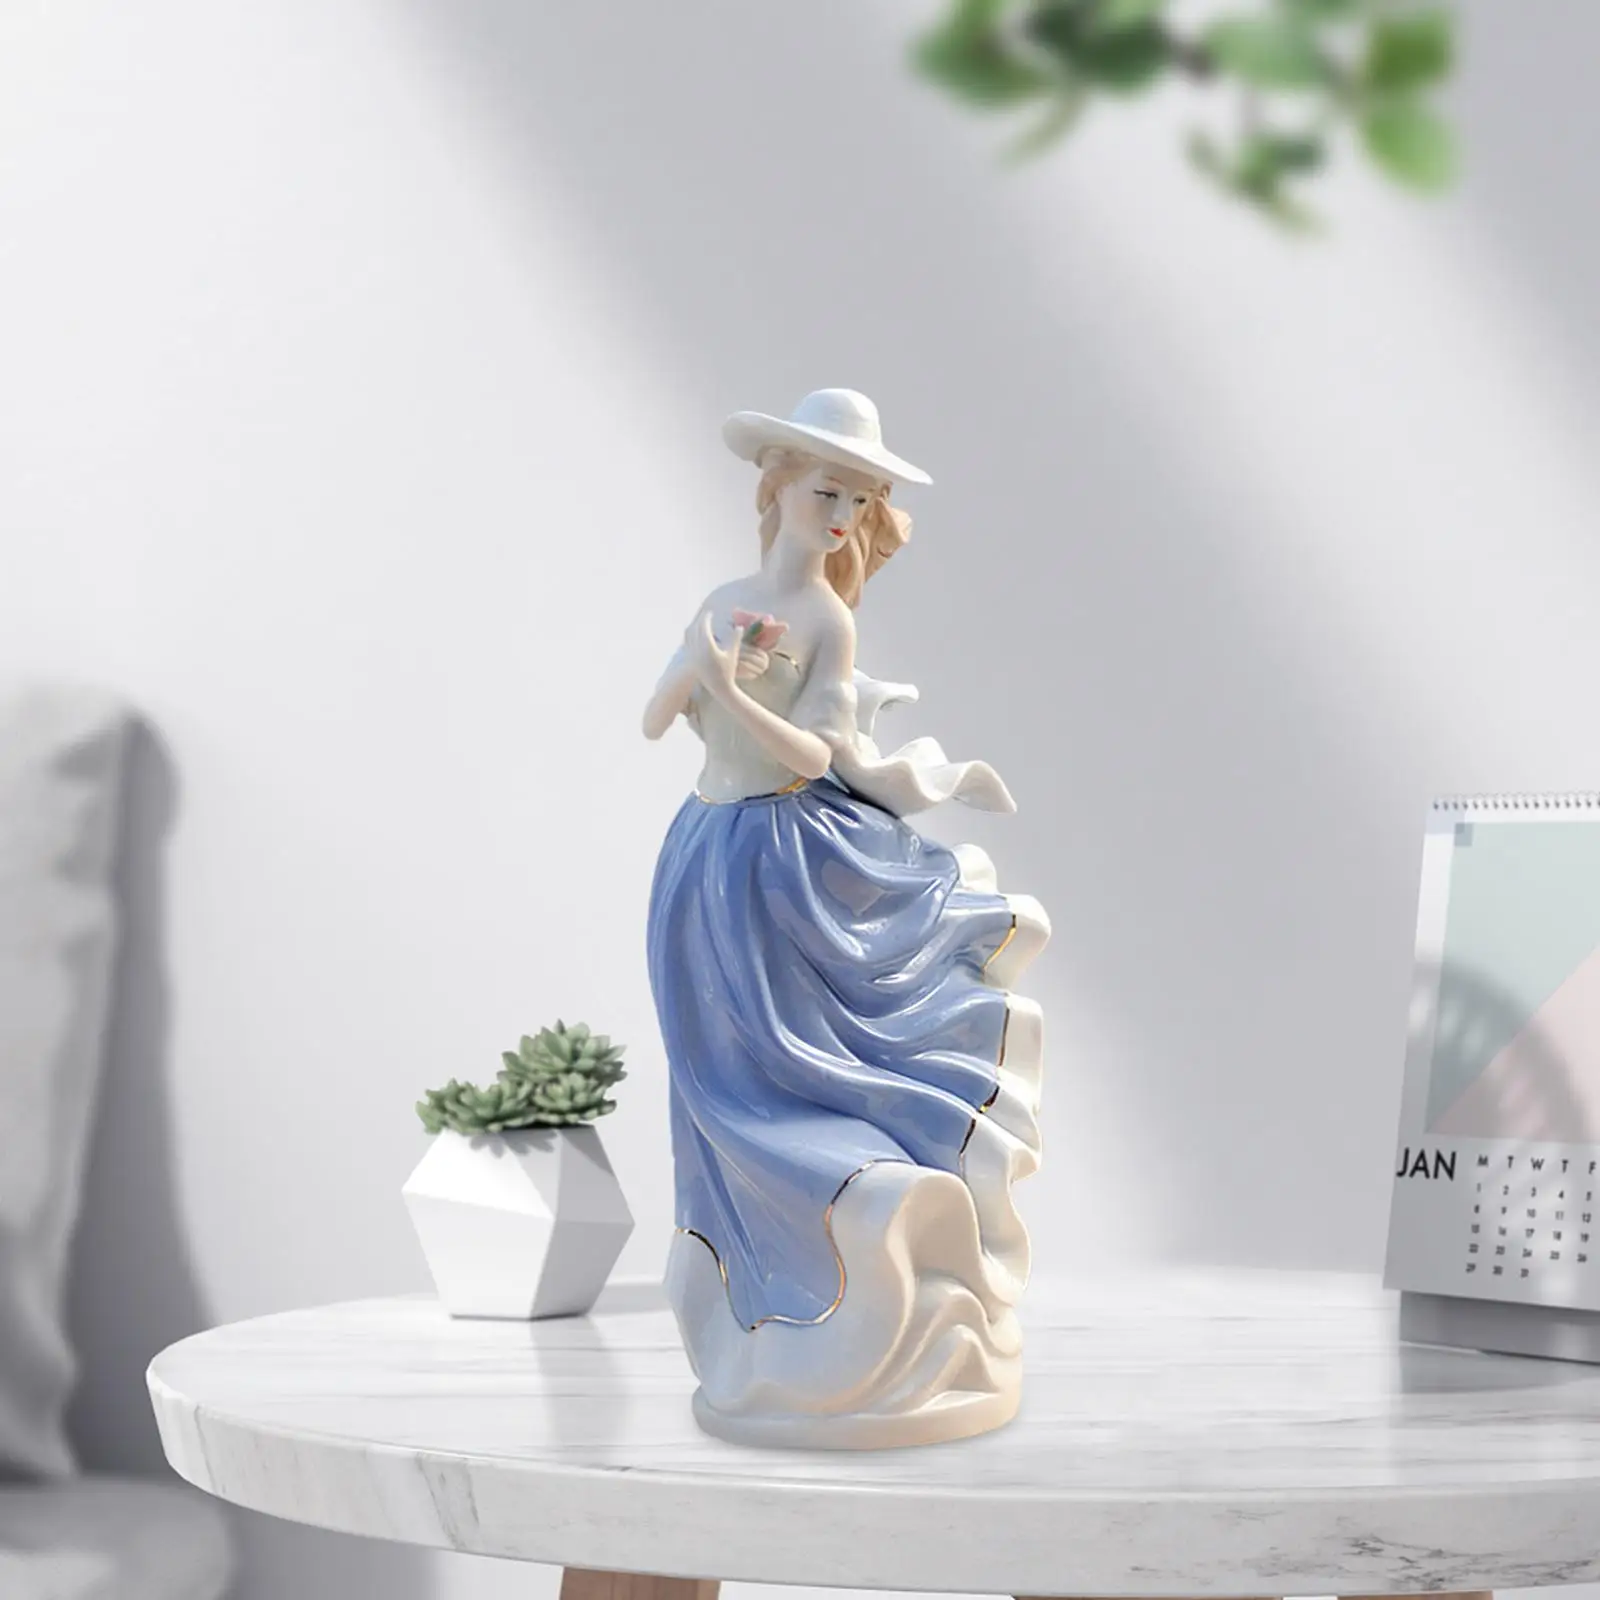 Modern Women Statue Lady Sculpture Decoration Collection Art Decor Artwork Tabletop Ceramic Girl Figurines for Living Room